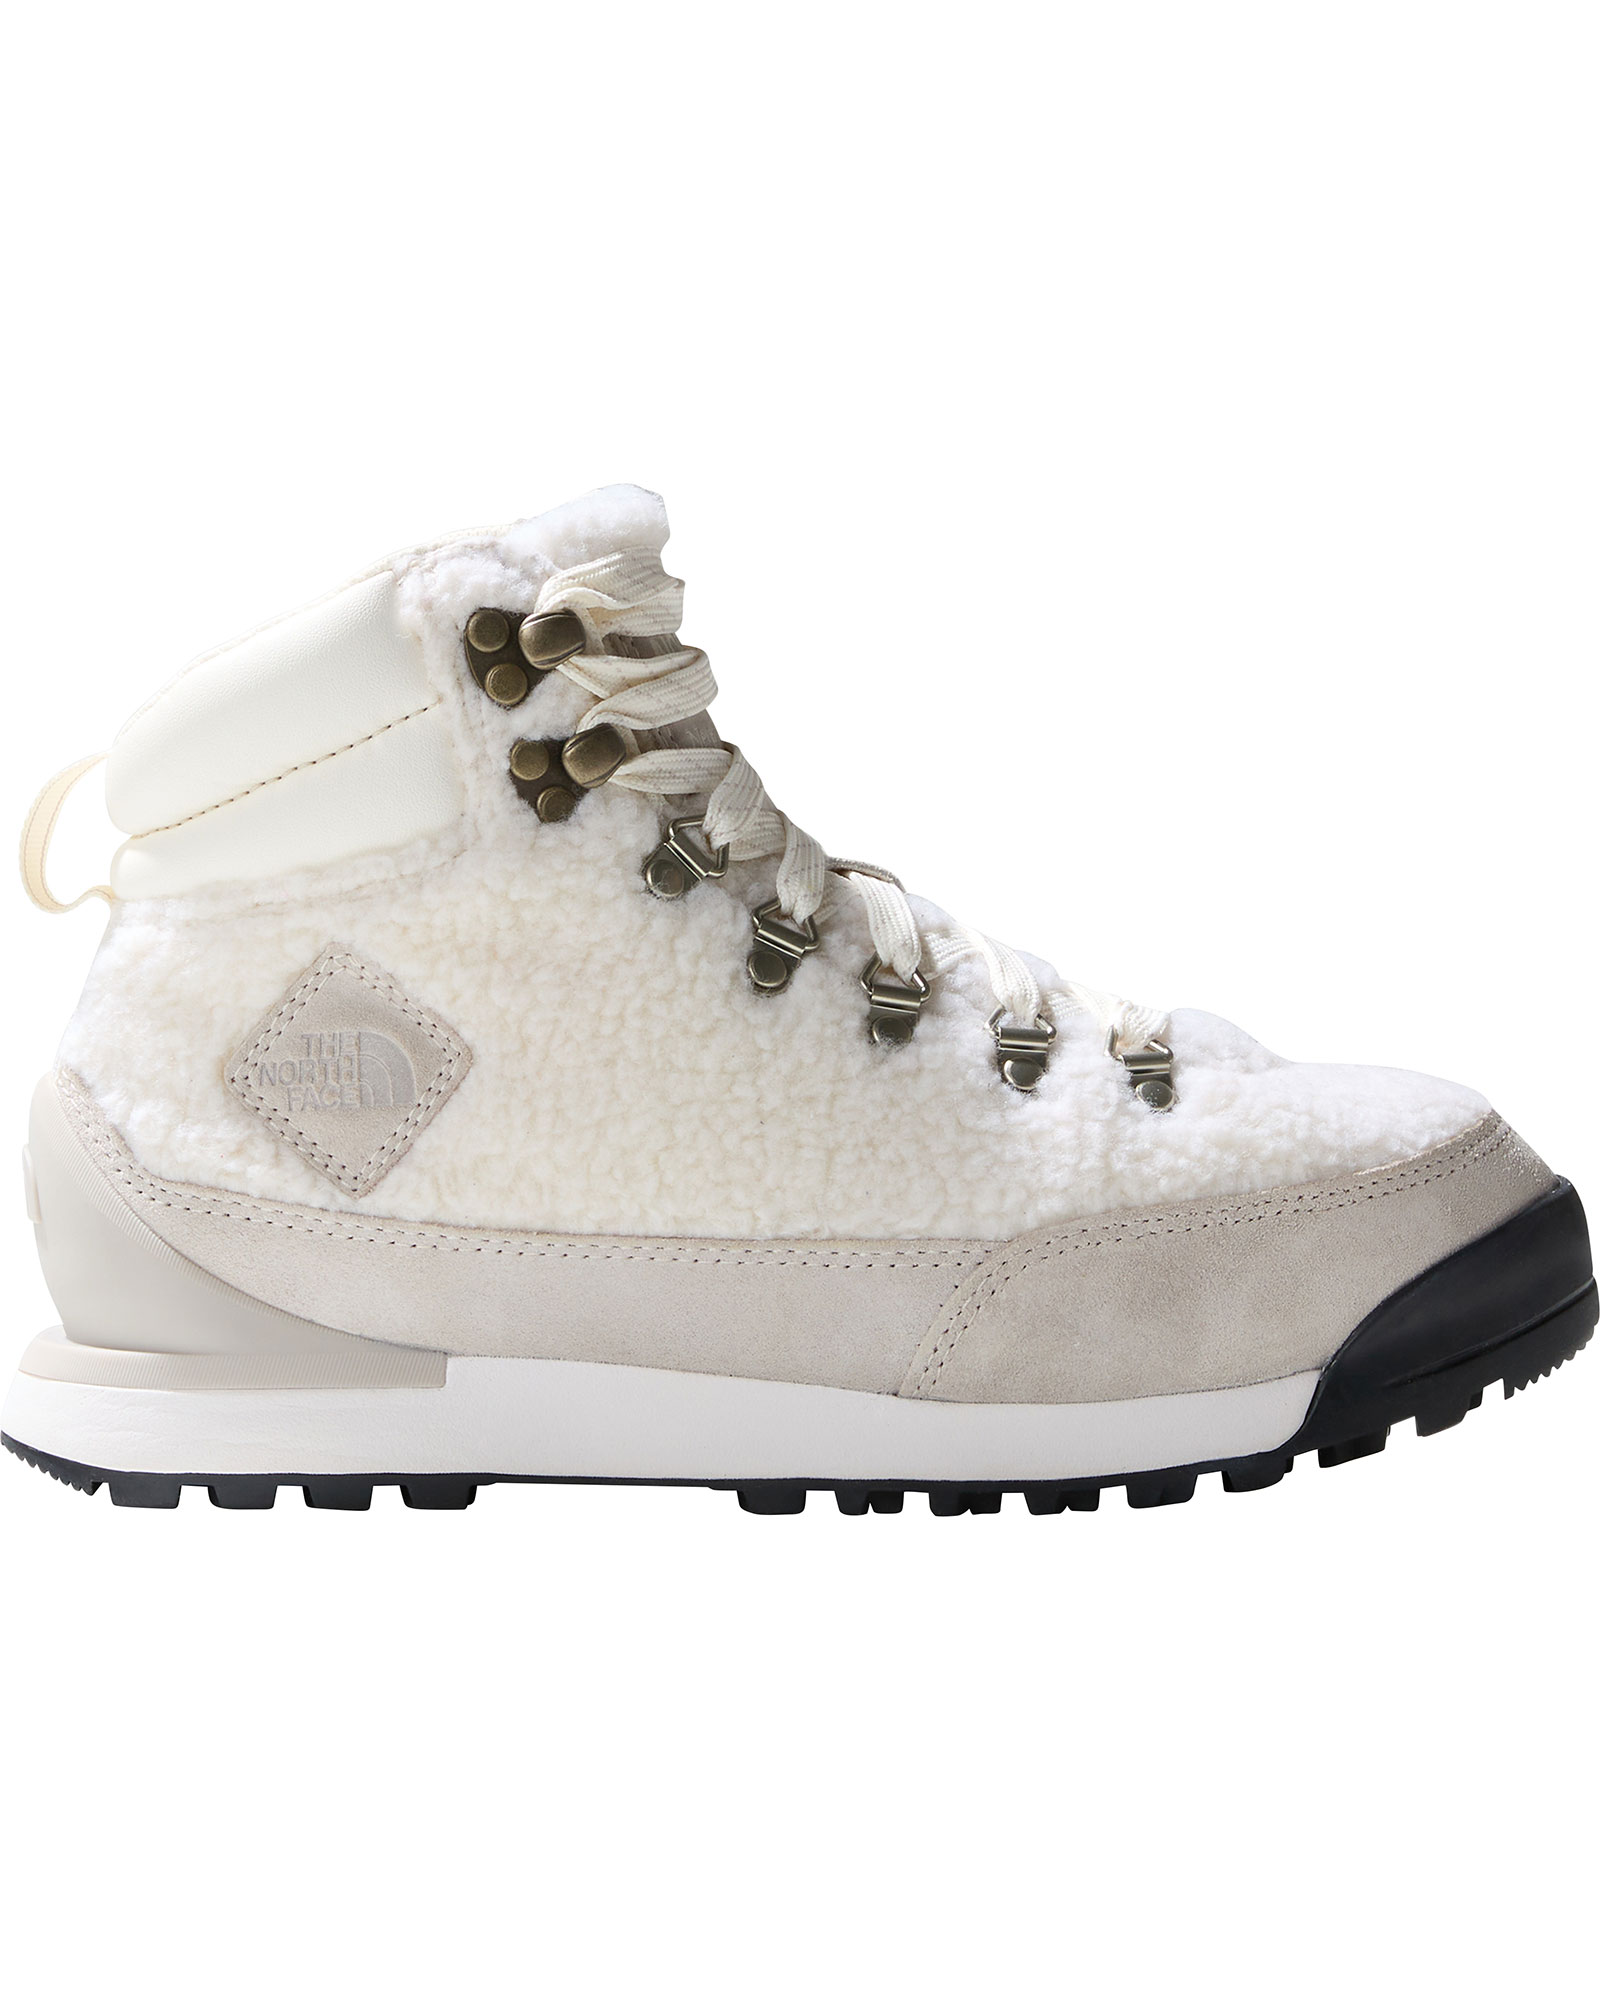 The North Face Back to Berkeley High Pile Women’s Boots - Gardenia White/Silver Grey UK 8